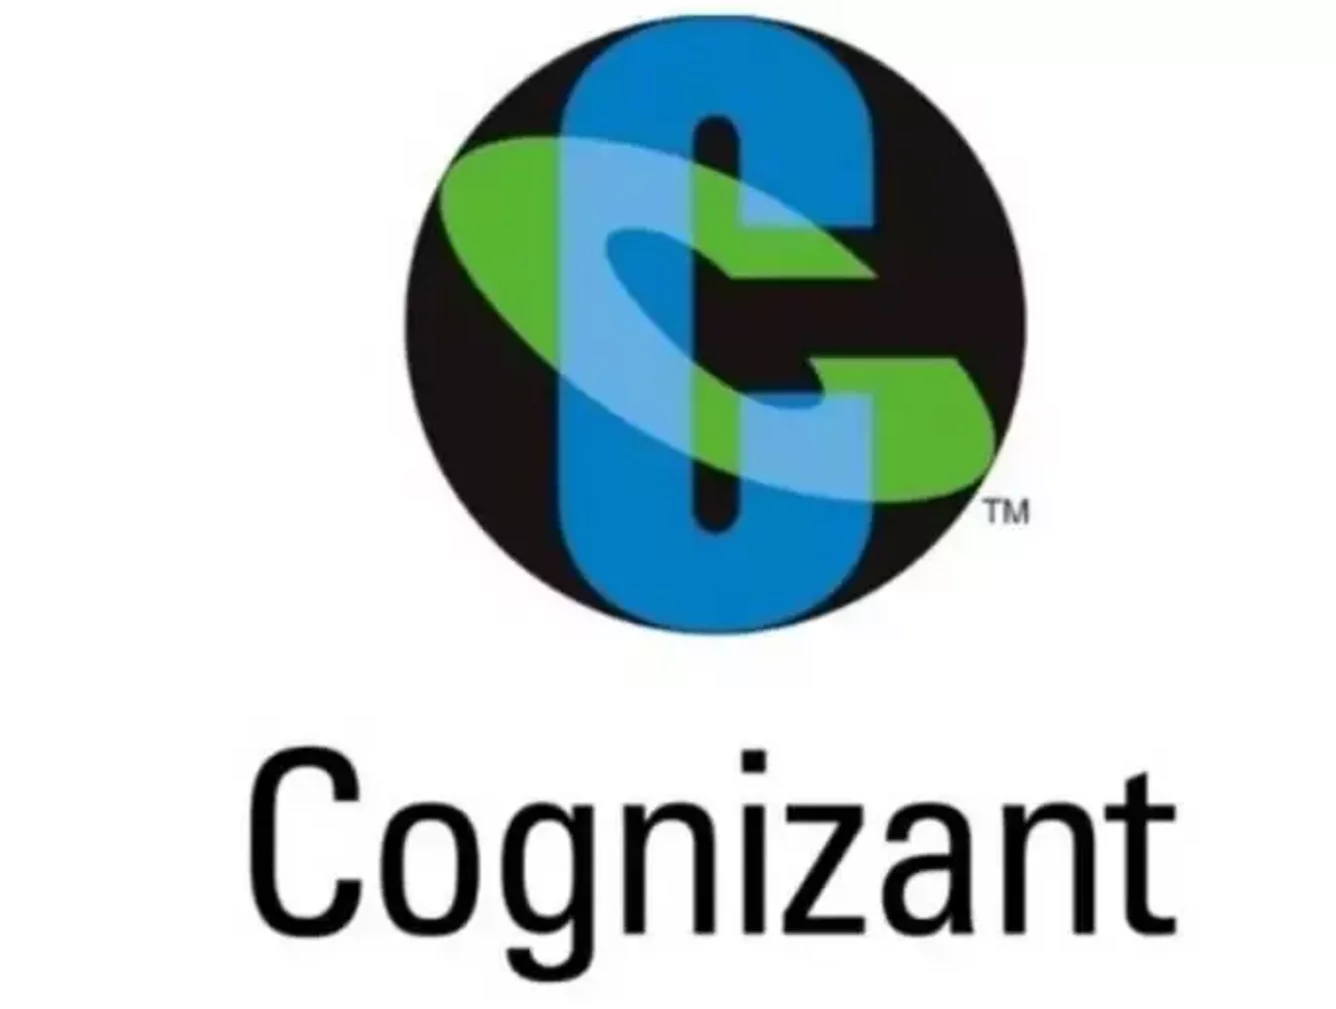 Cognizant ranking in fortune 500 highmark direct easton pa